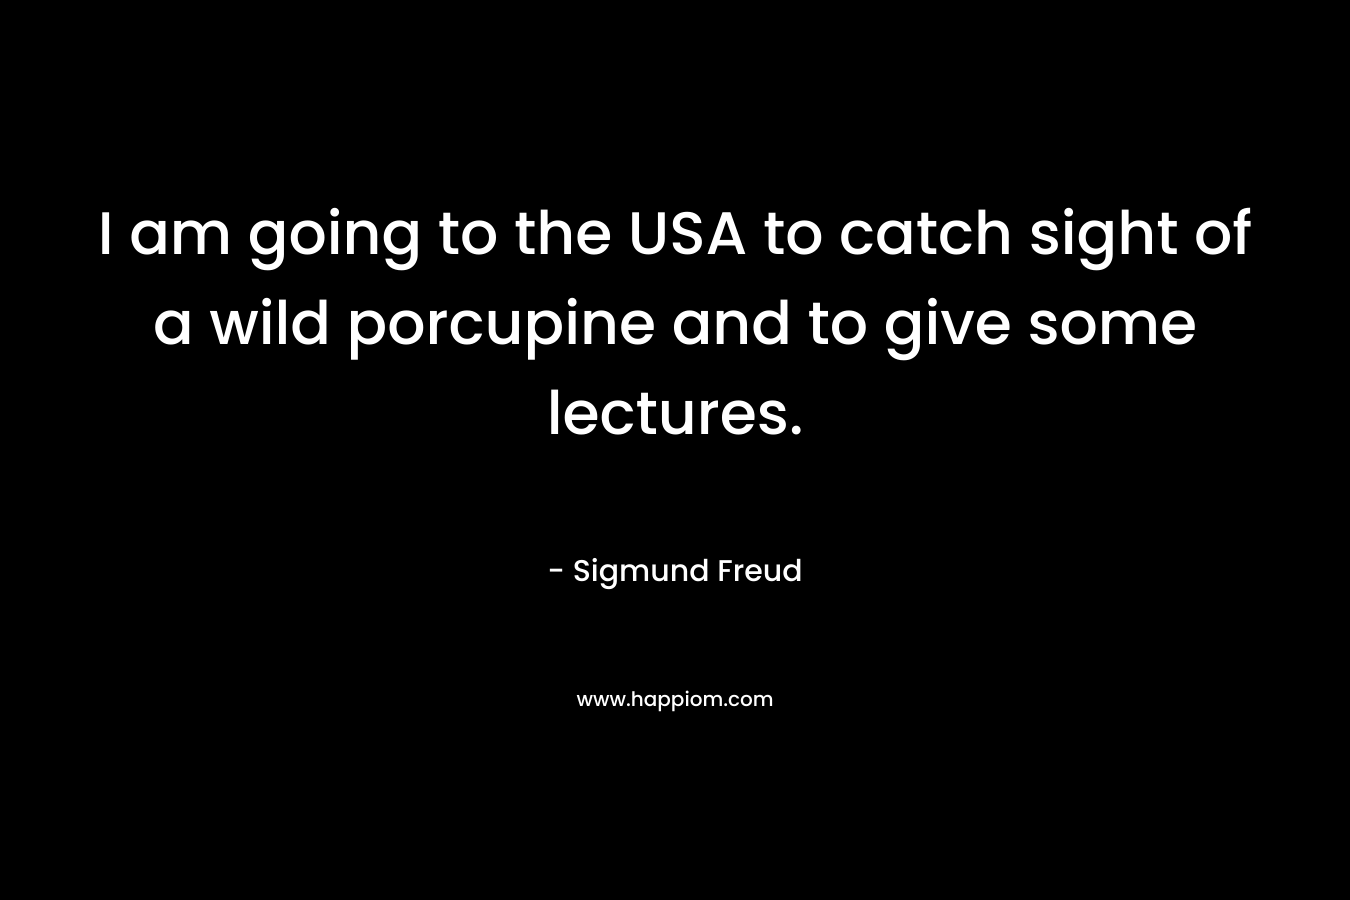 I am going to the USA to catch sight of a wild porcupine and to give some lectures. – Sigmund Freud